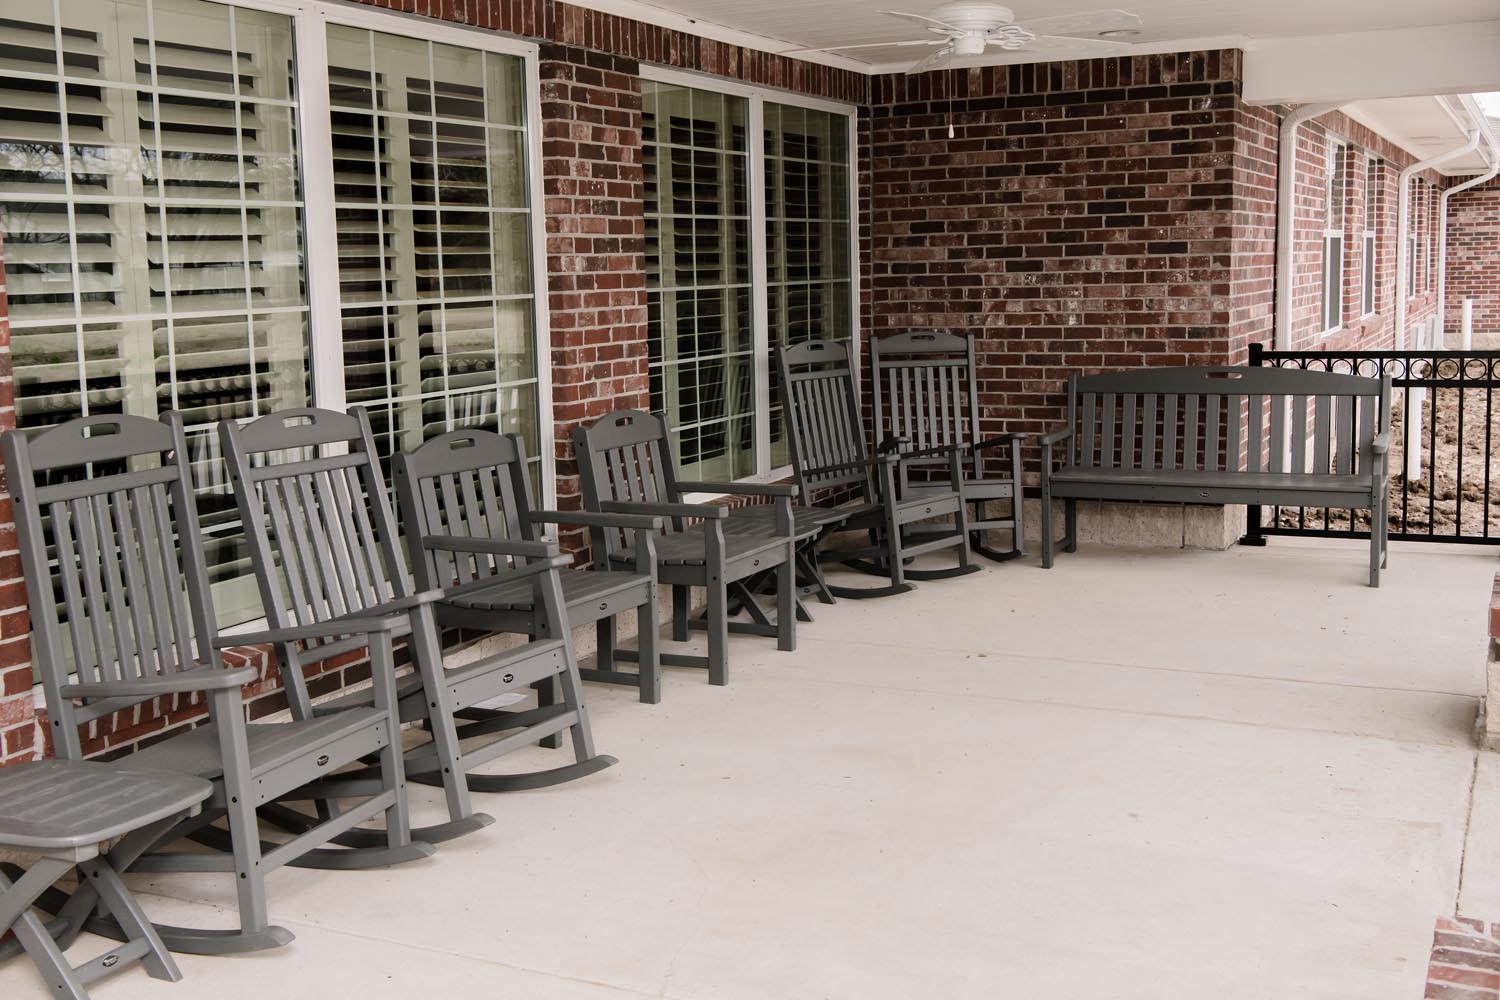 Rocking chairs on the porch